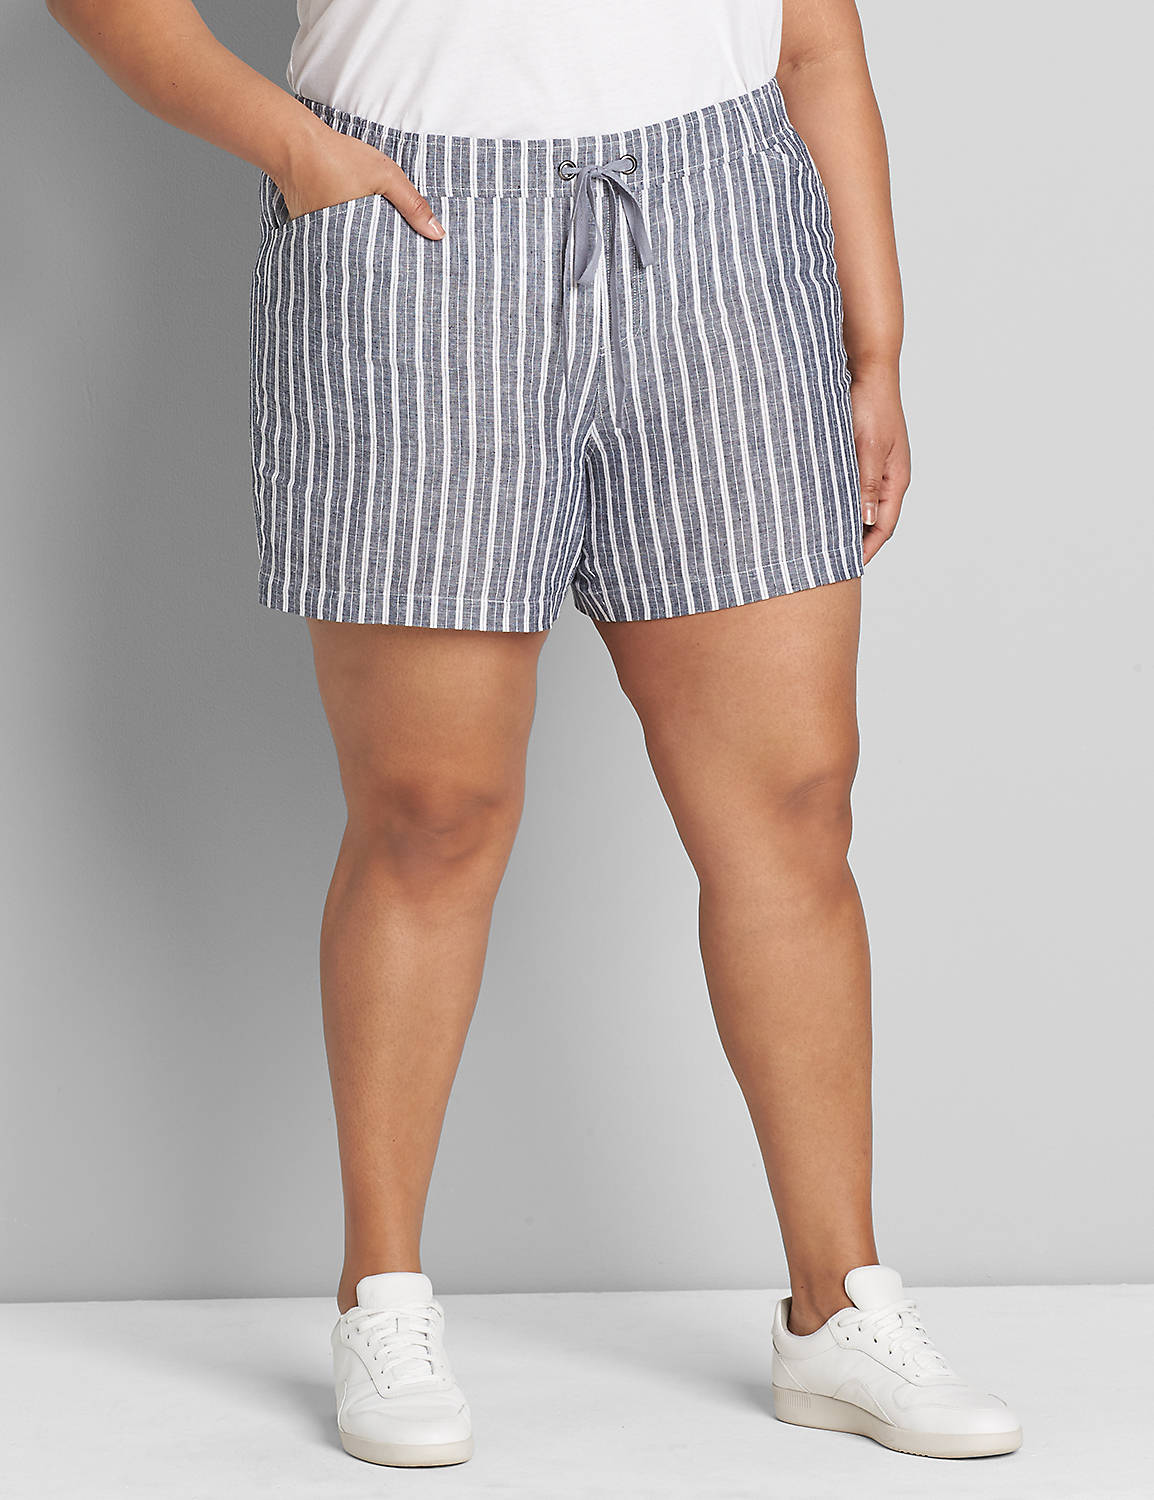 Outlet Pull-On 5 1/2" Short 1119048 [Copy of 1110939]:Navy/ White Variegated Stripe- As Hanger:12 Product Image 1